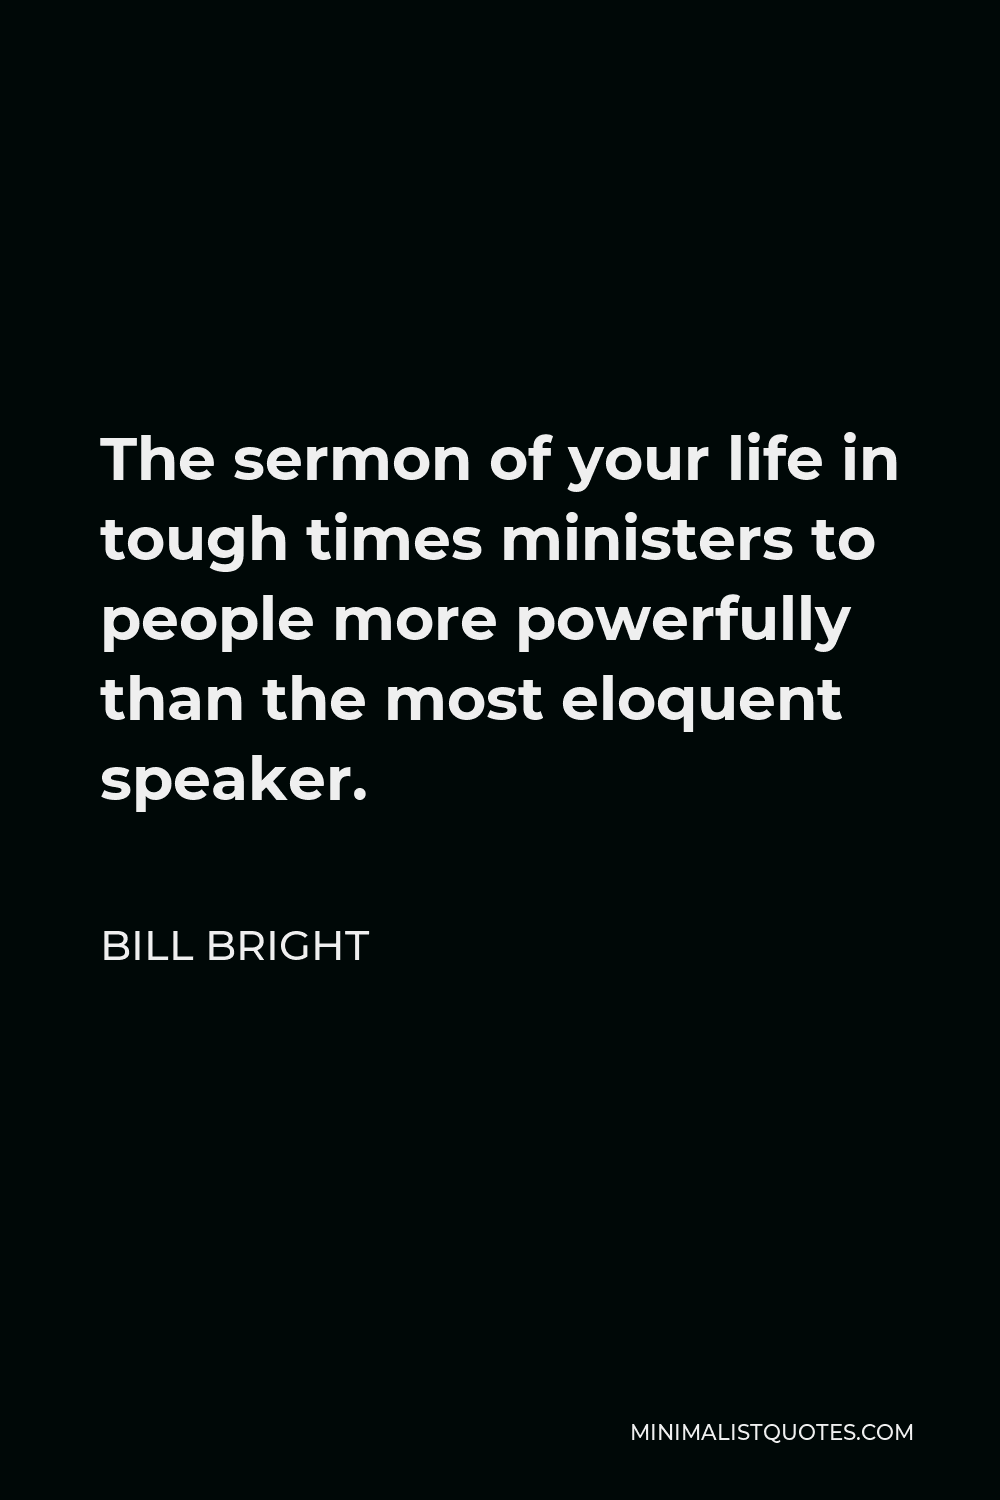 Bill Bright Quote - The sermon of your life in tough times ministers to people more powerfully than the most eloquent speaker.